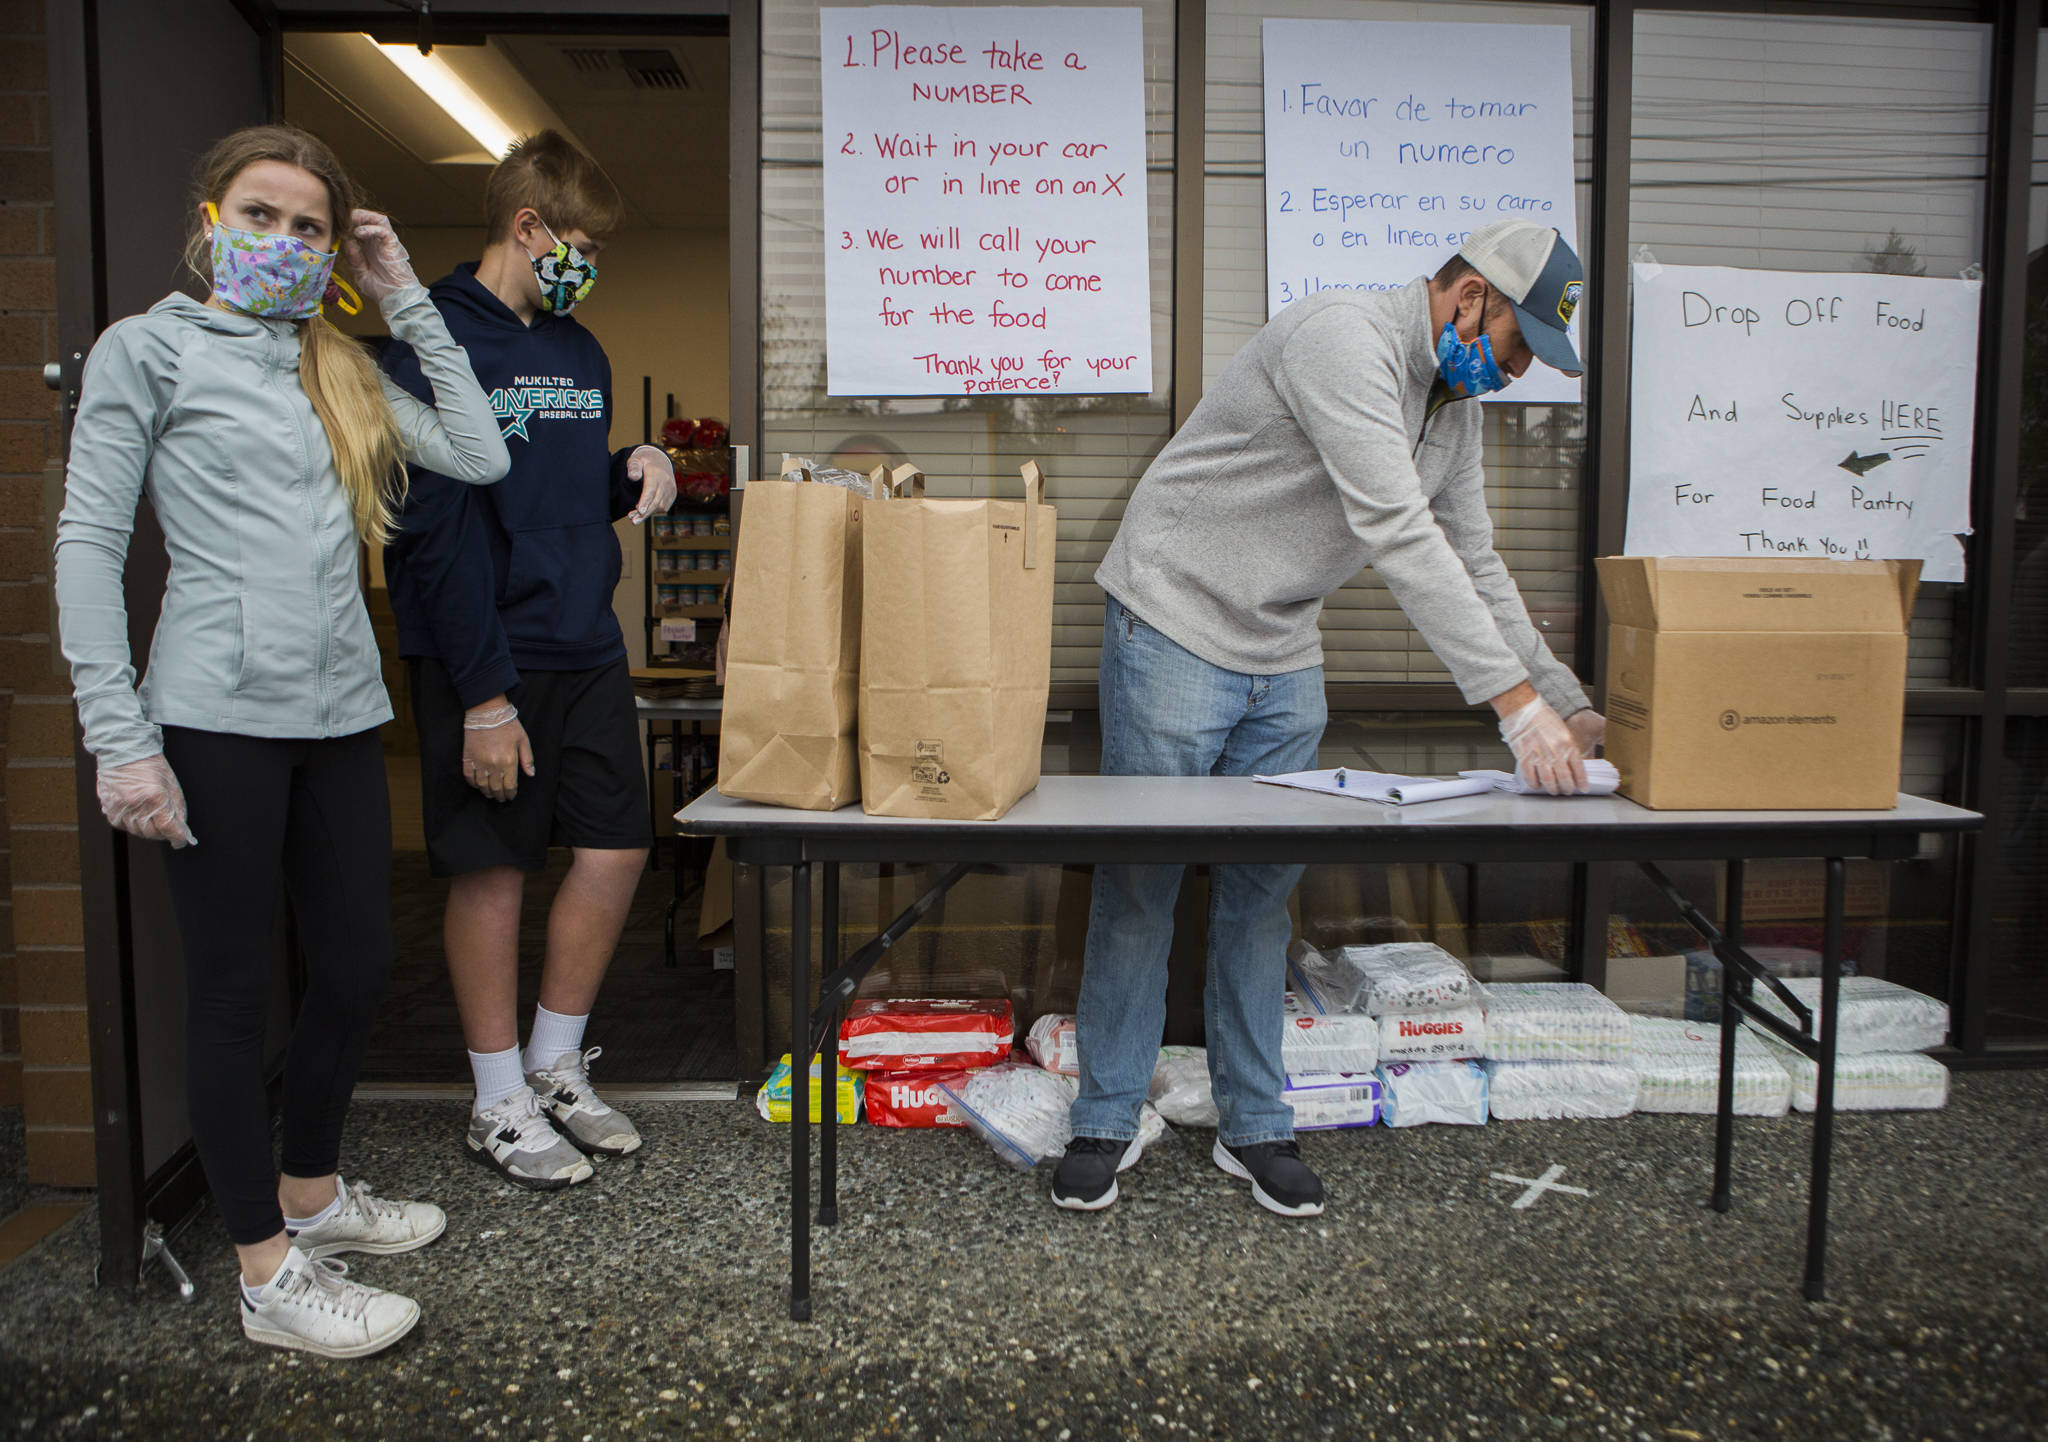 Reese Jordan (left) and Cole Armstrong-Hoss (center) wait for instructions from Cory Armstrong-Hoss (right) as they set up to open the temporary food bank at The Village on April 21 in Everett. (Olivia Vanni / The Herald)